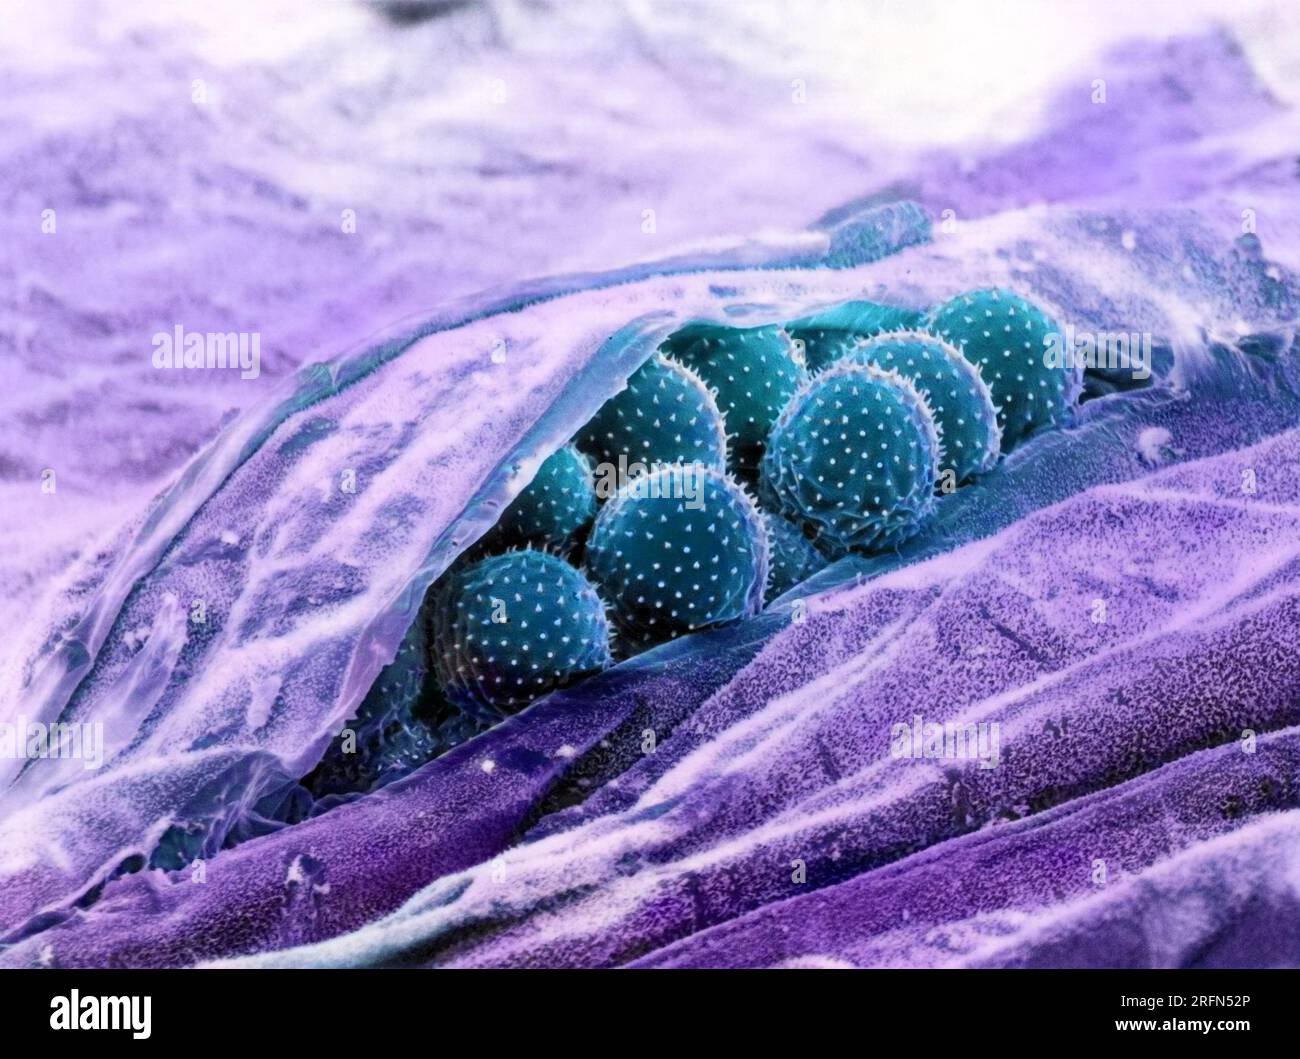 Scanning Electron Micrograph (SEM) of Rust on wheat leaf. Magnification: 1160x Stock Photo